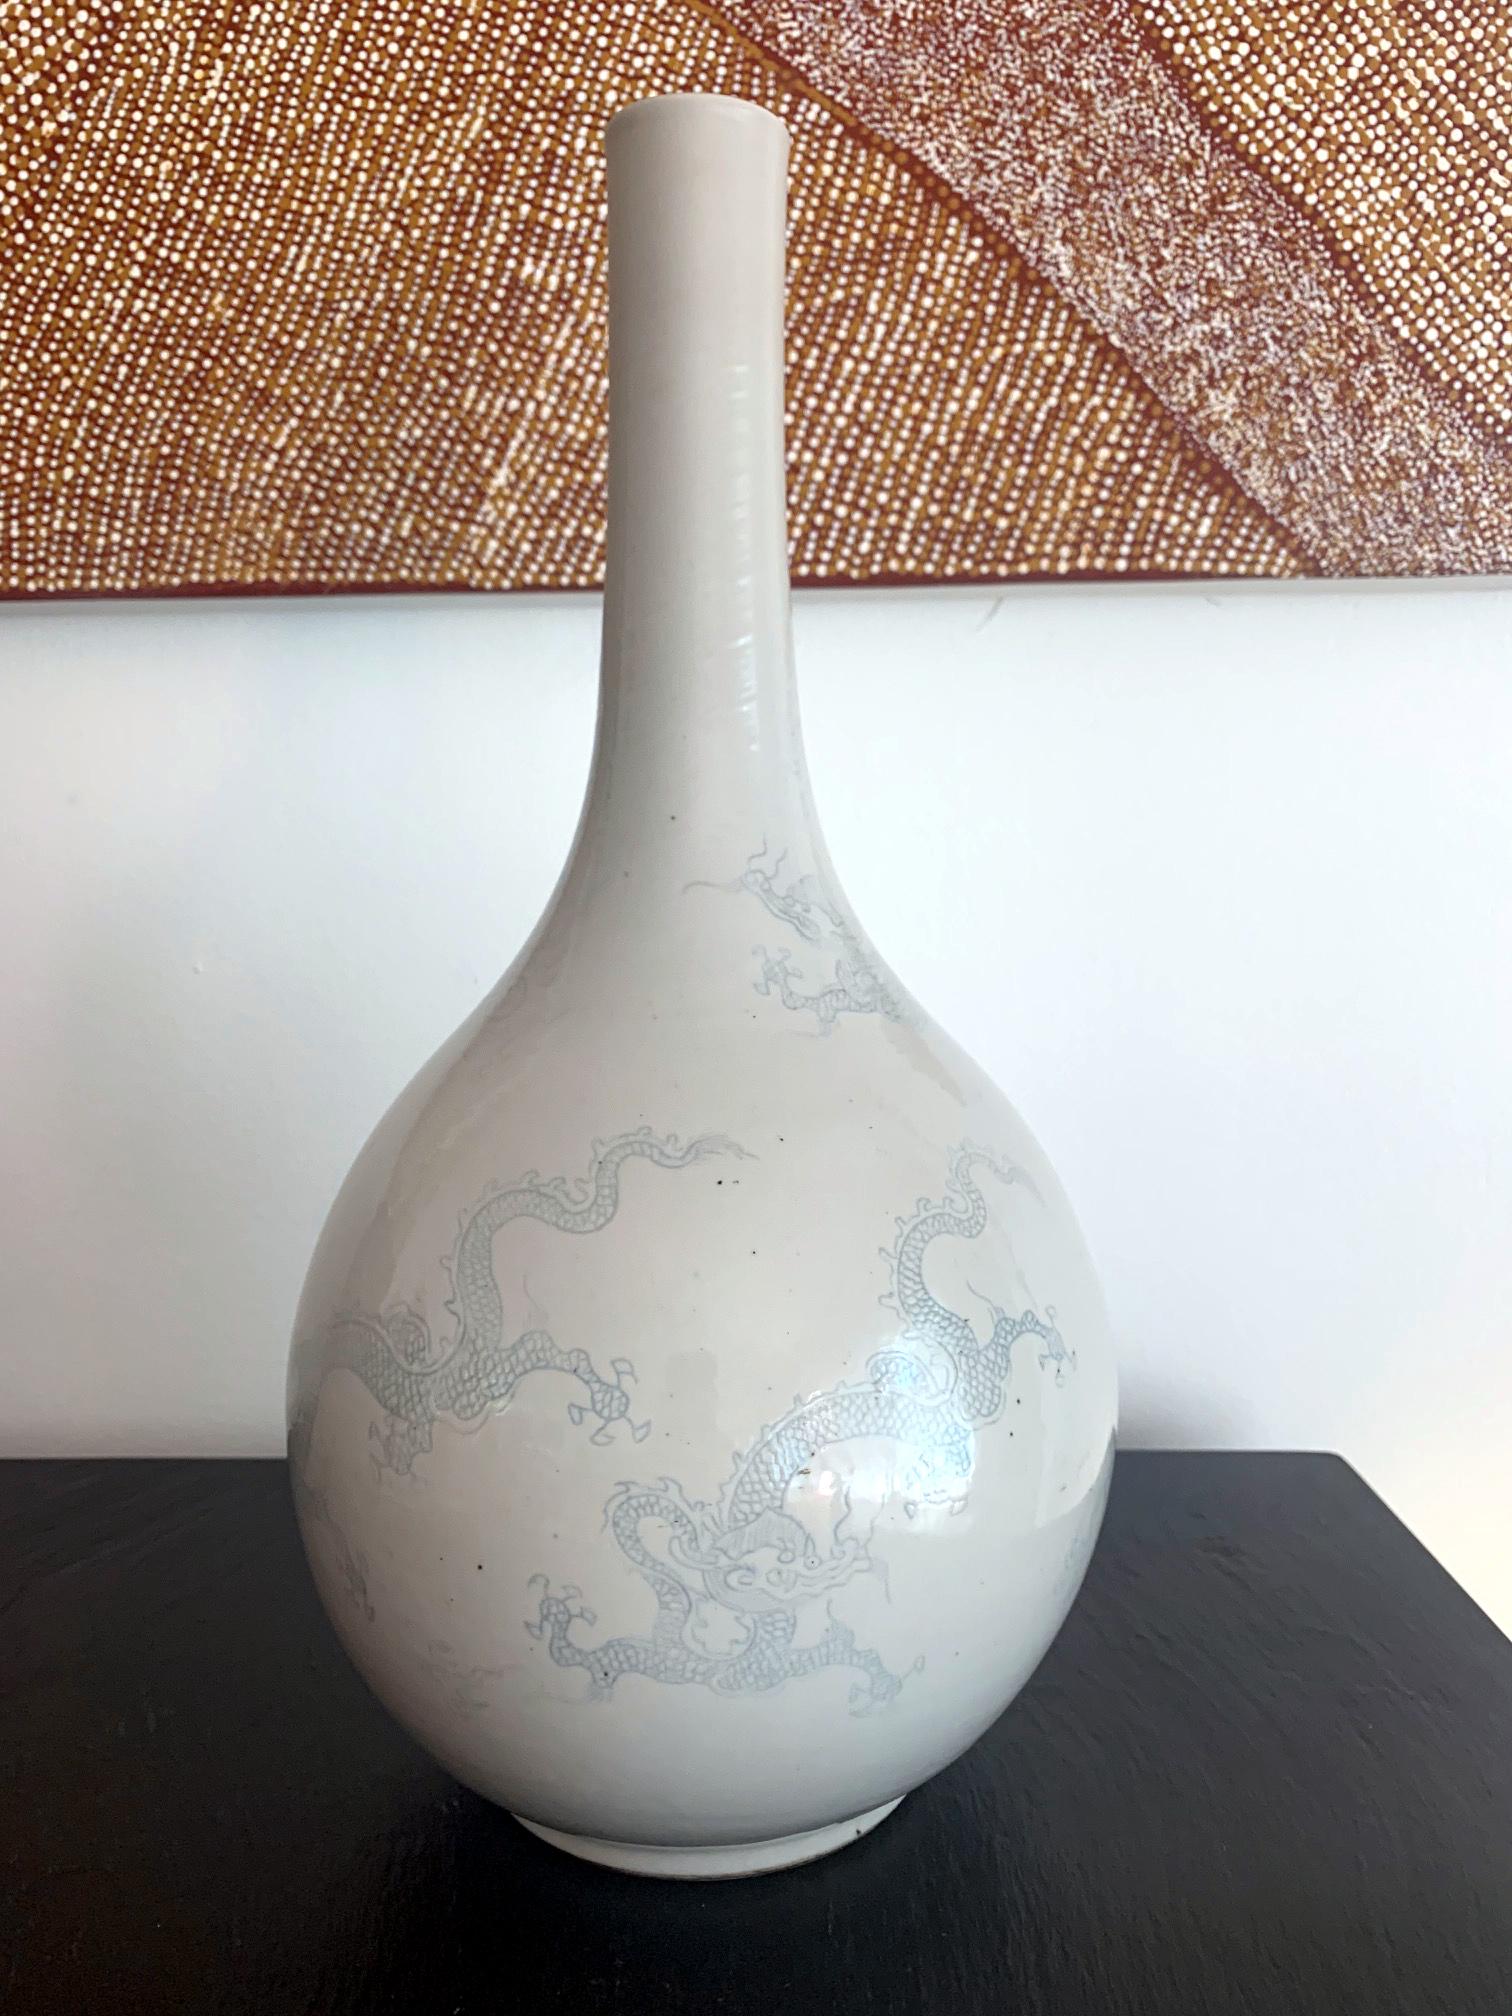 A large Korean dragon vase in an elegant classic form, with a straight neck and mouth and base rim. The white surface is subtly decorated with five blue underglaze flying dragons chasing flaming pearls. The white over glaze was applied in an